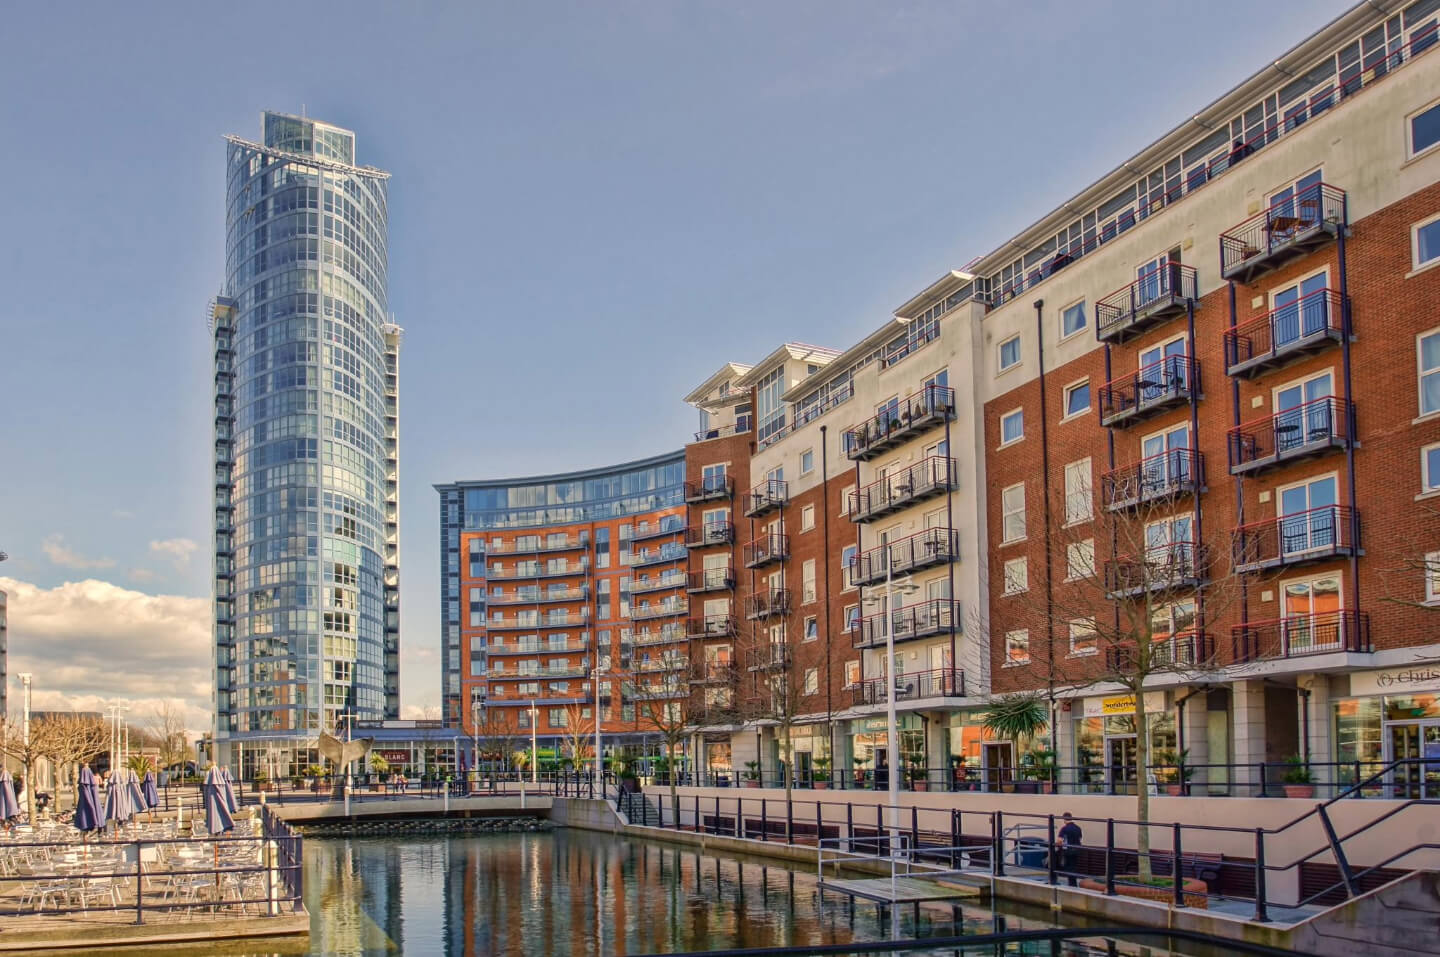 Student Accommodation in Gunwharf Quays, Portsmouth - flats by the water in Gunwharf Quays